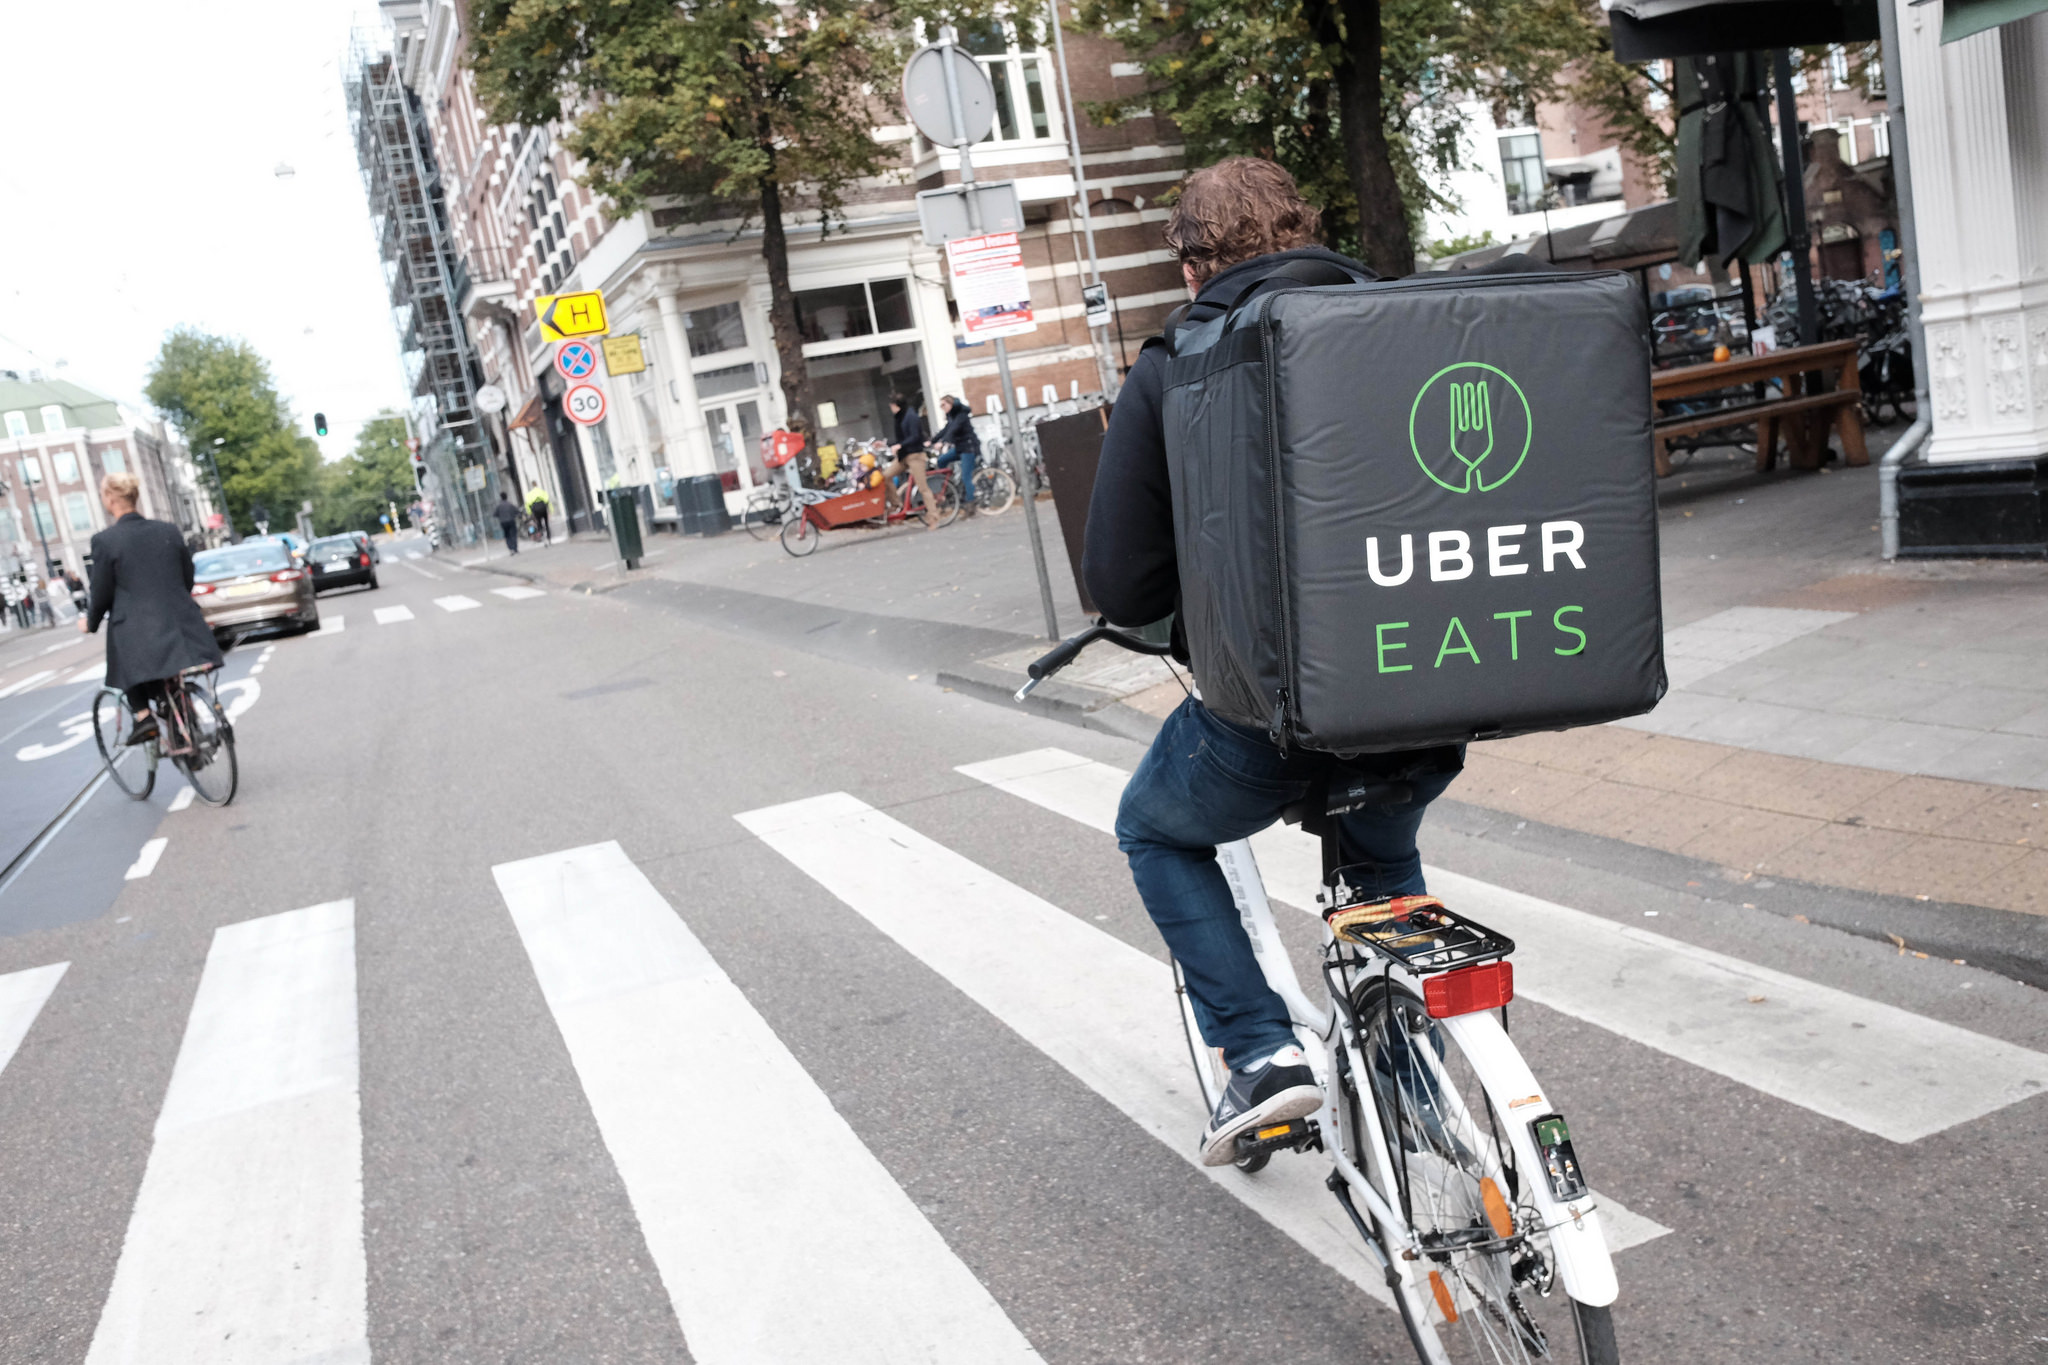 Uber Eats couriers in Europe to be offered free accident ...